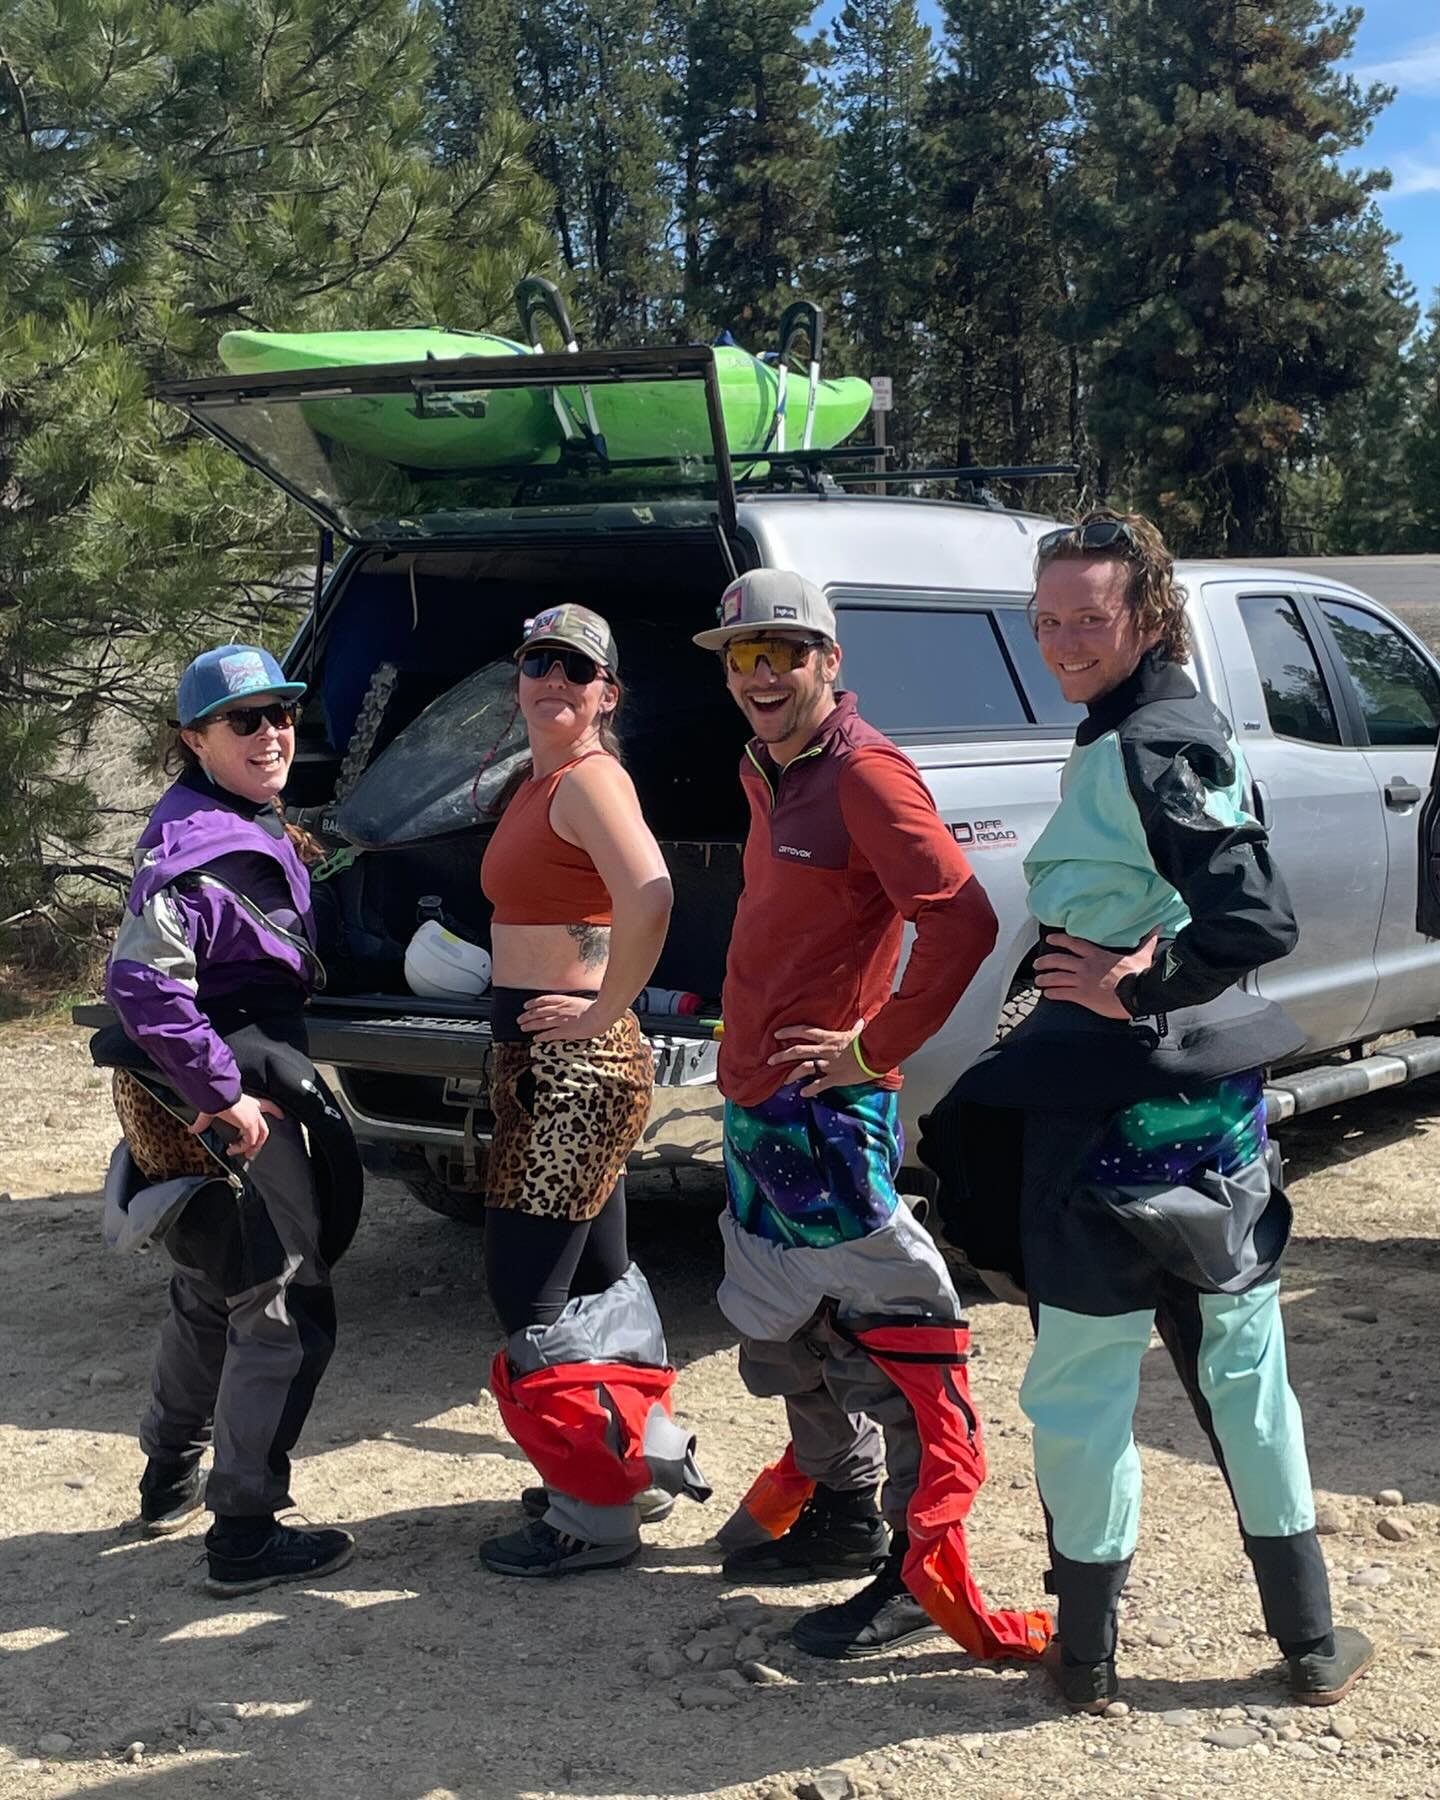 Paddling season is on, and our local town run is in!  So we gotta get it while we can!

And as always, dressed for success with our FunLuvin&rsquo; Fleece keeping us warm and cozy in our dry suits! 

All of our fleece shorts are on sale this week!  S